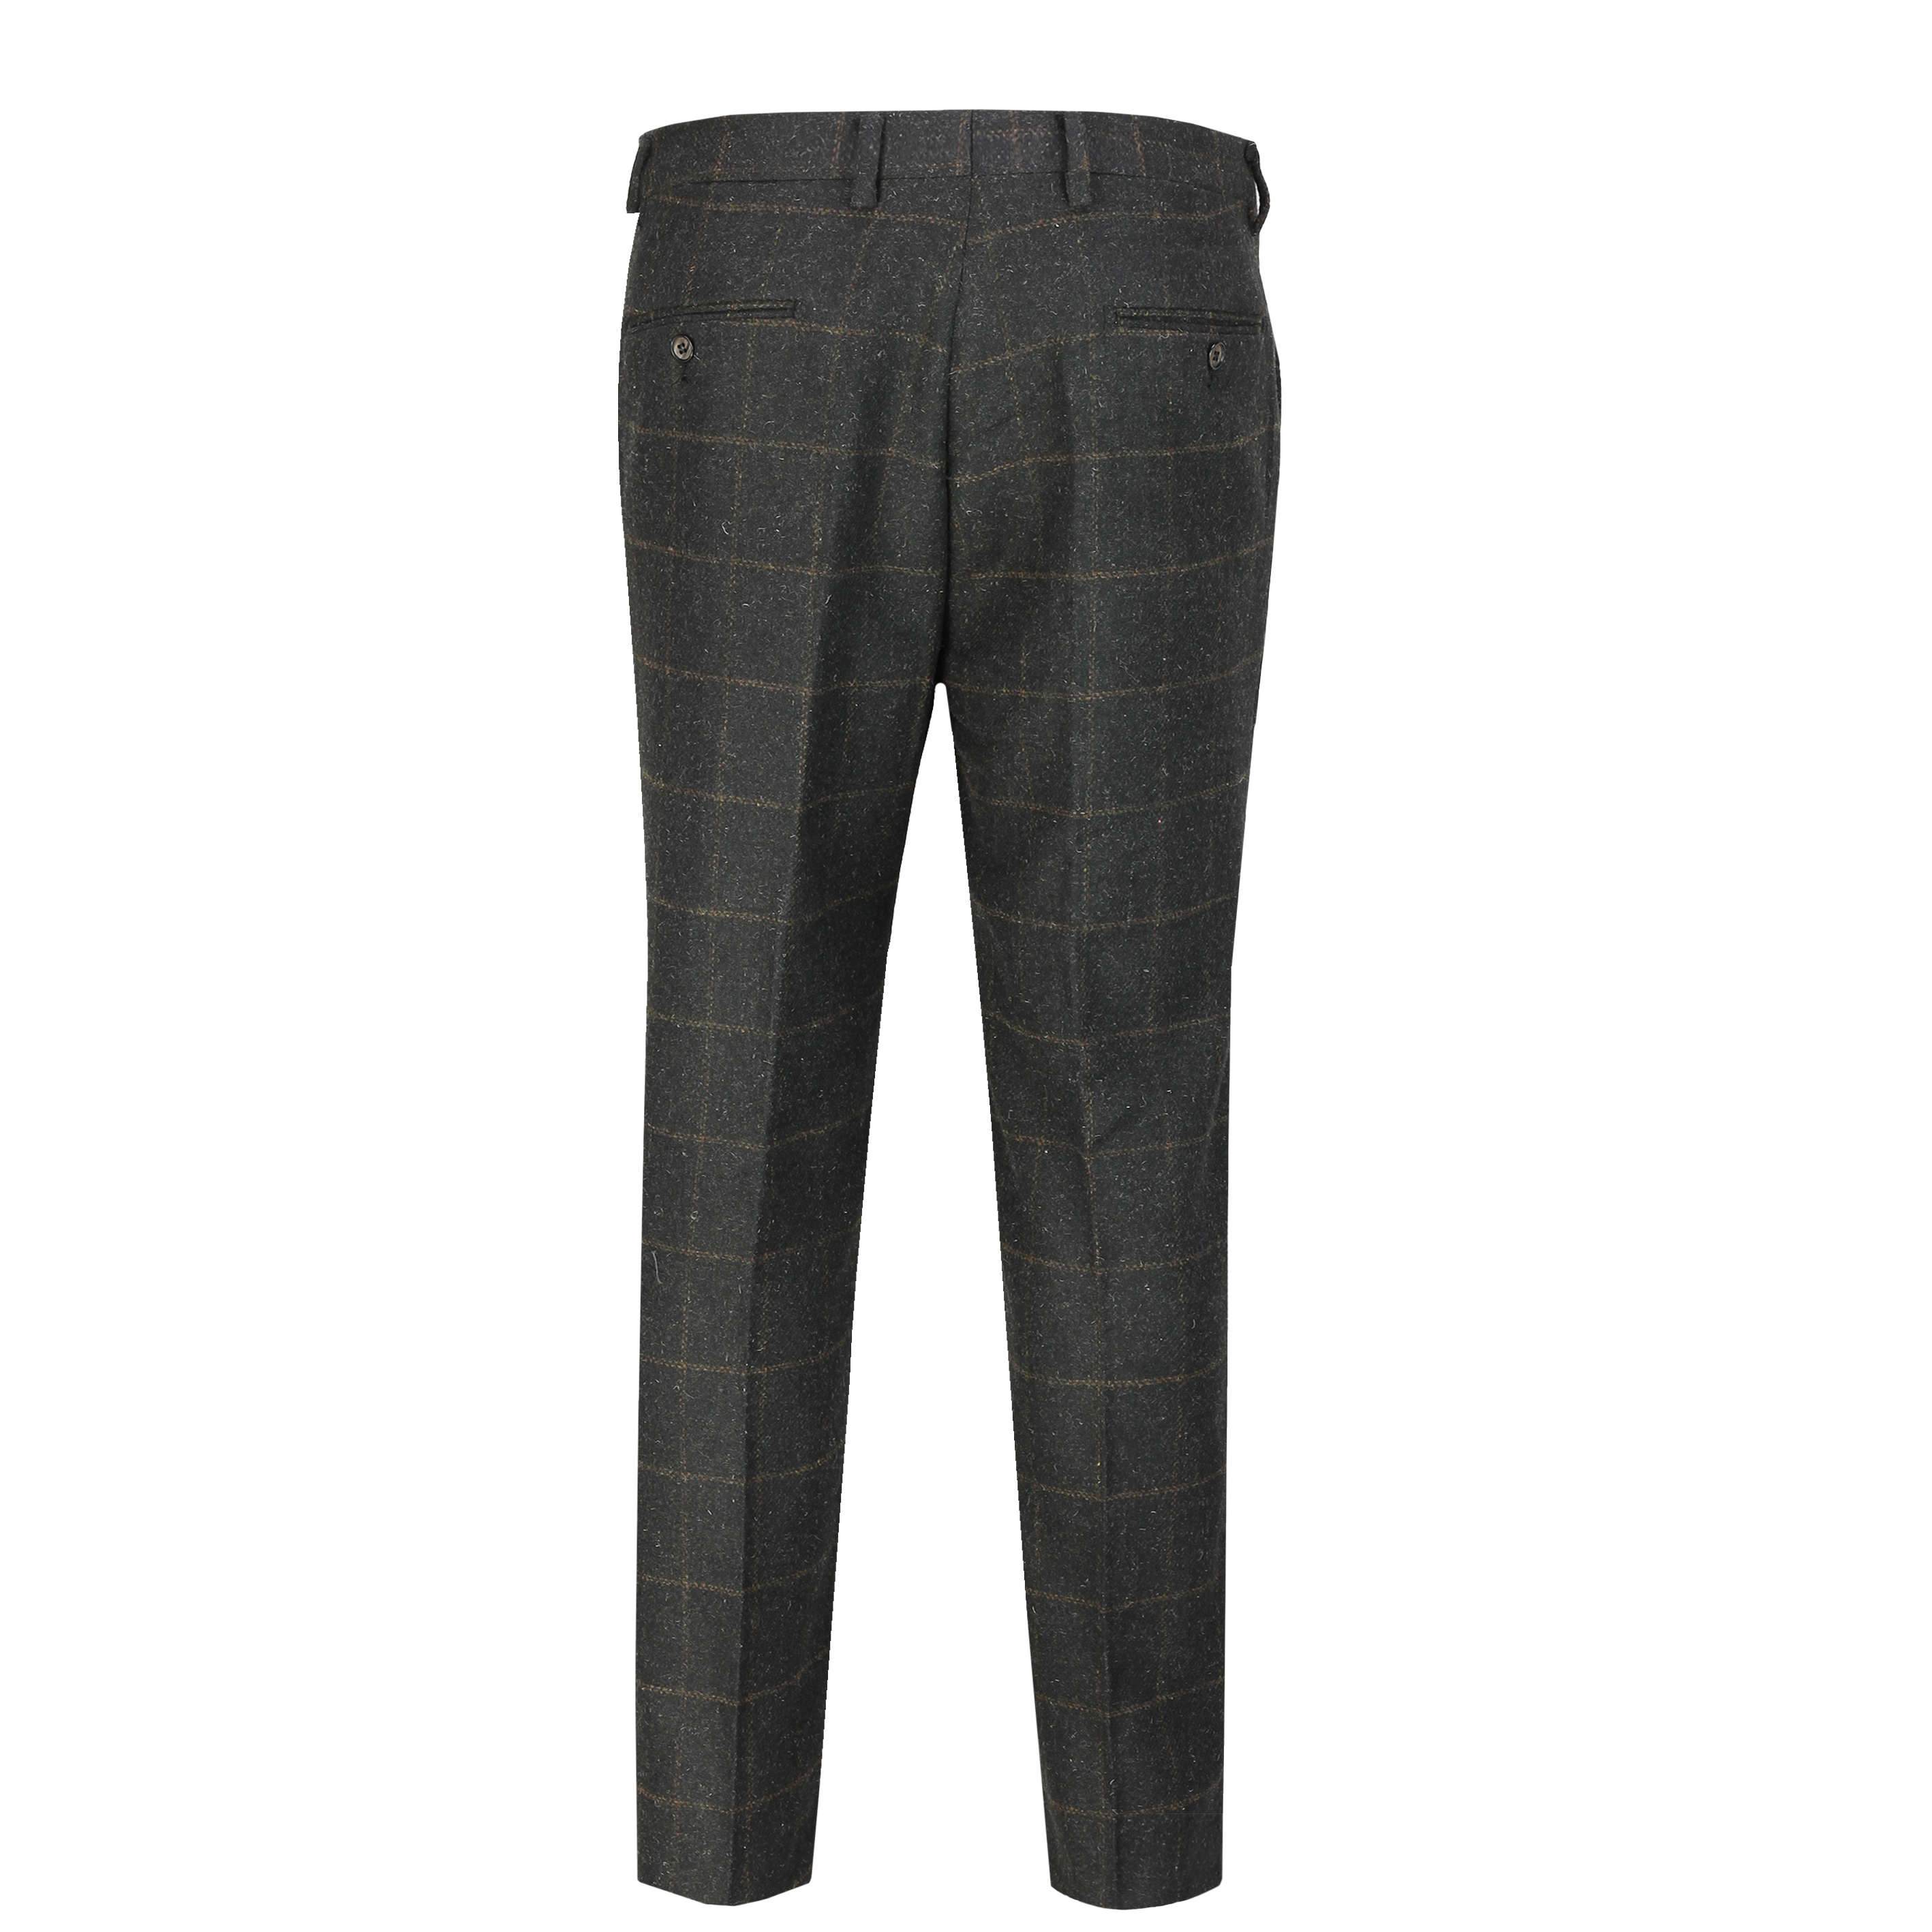 Mens Vintage Tweed Check Trousers Retro Tailored Fit Classic Peaky Blinders Pant